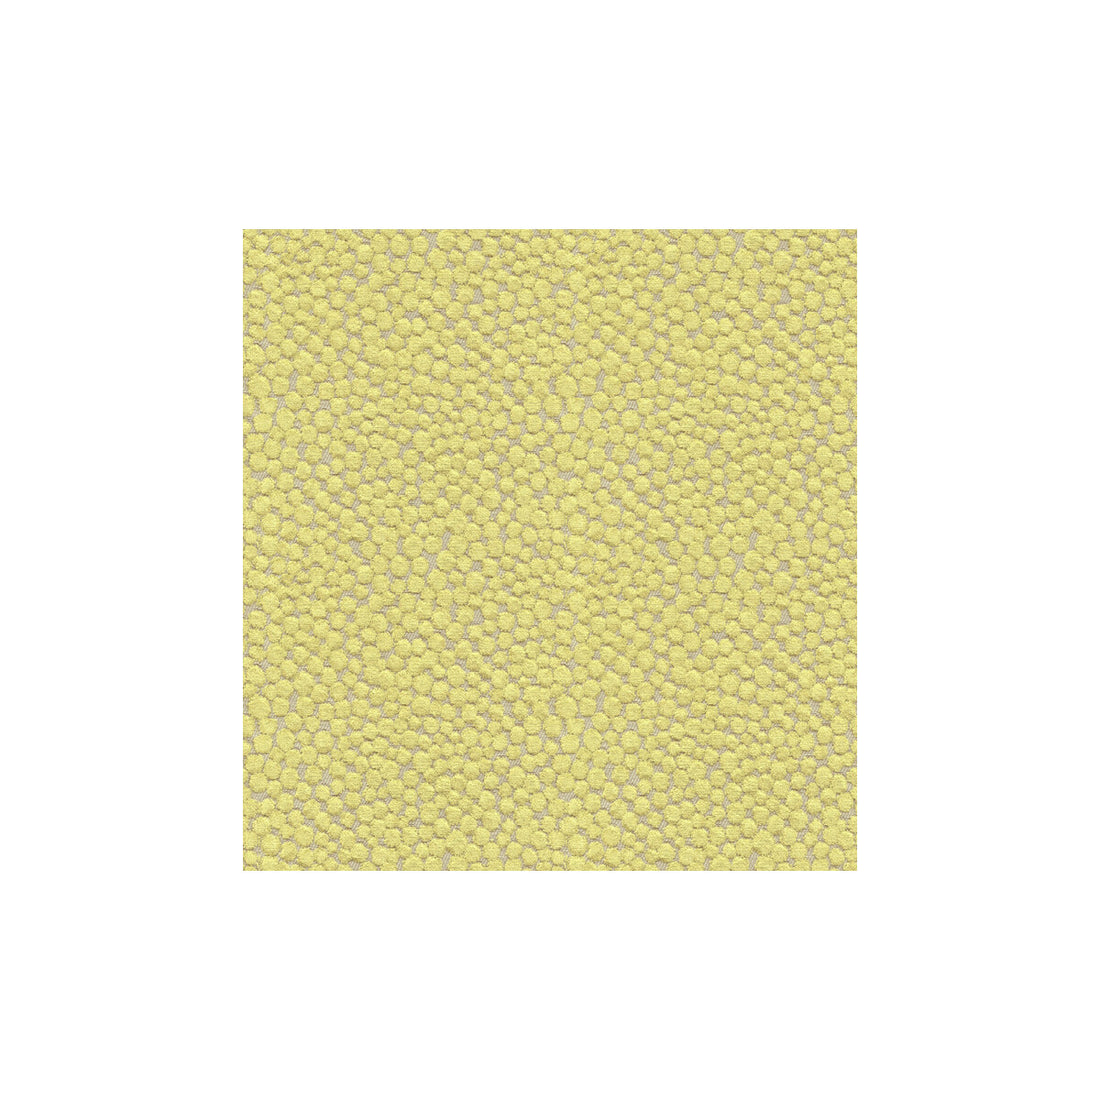 Polka Dot Plush fabric in wasabi color - pattern 32972.323.0 - by Kravet Couture in the Modern Colors III collection